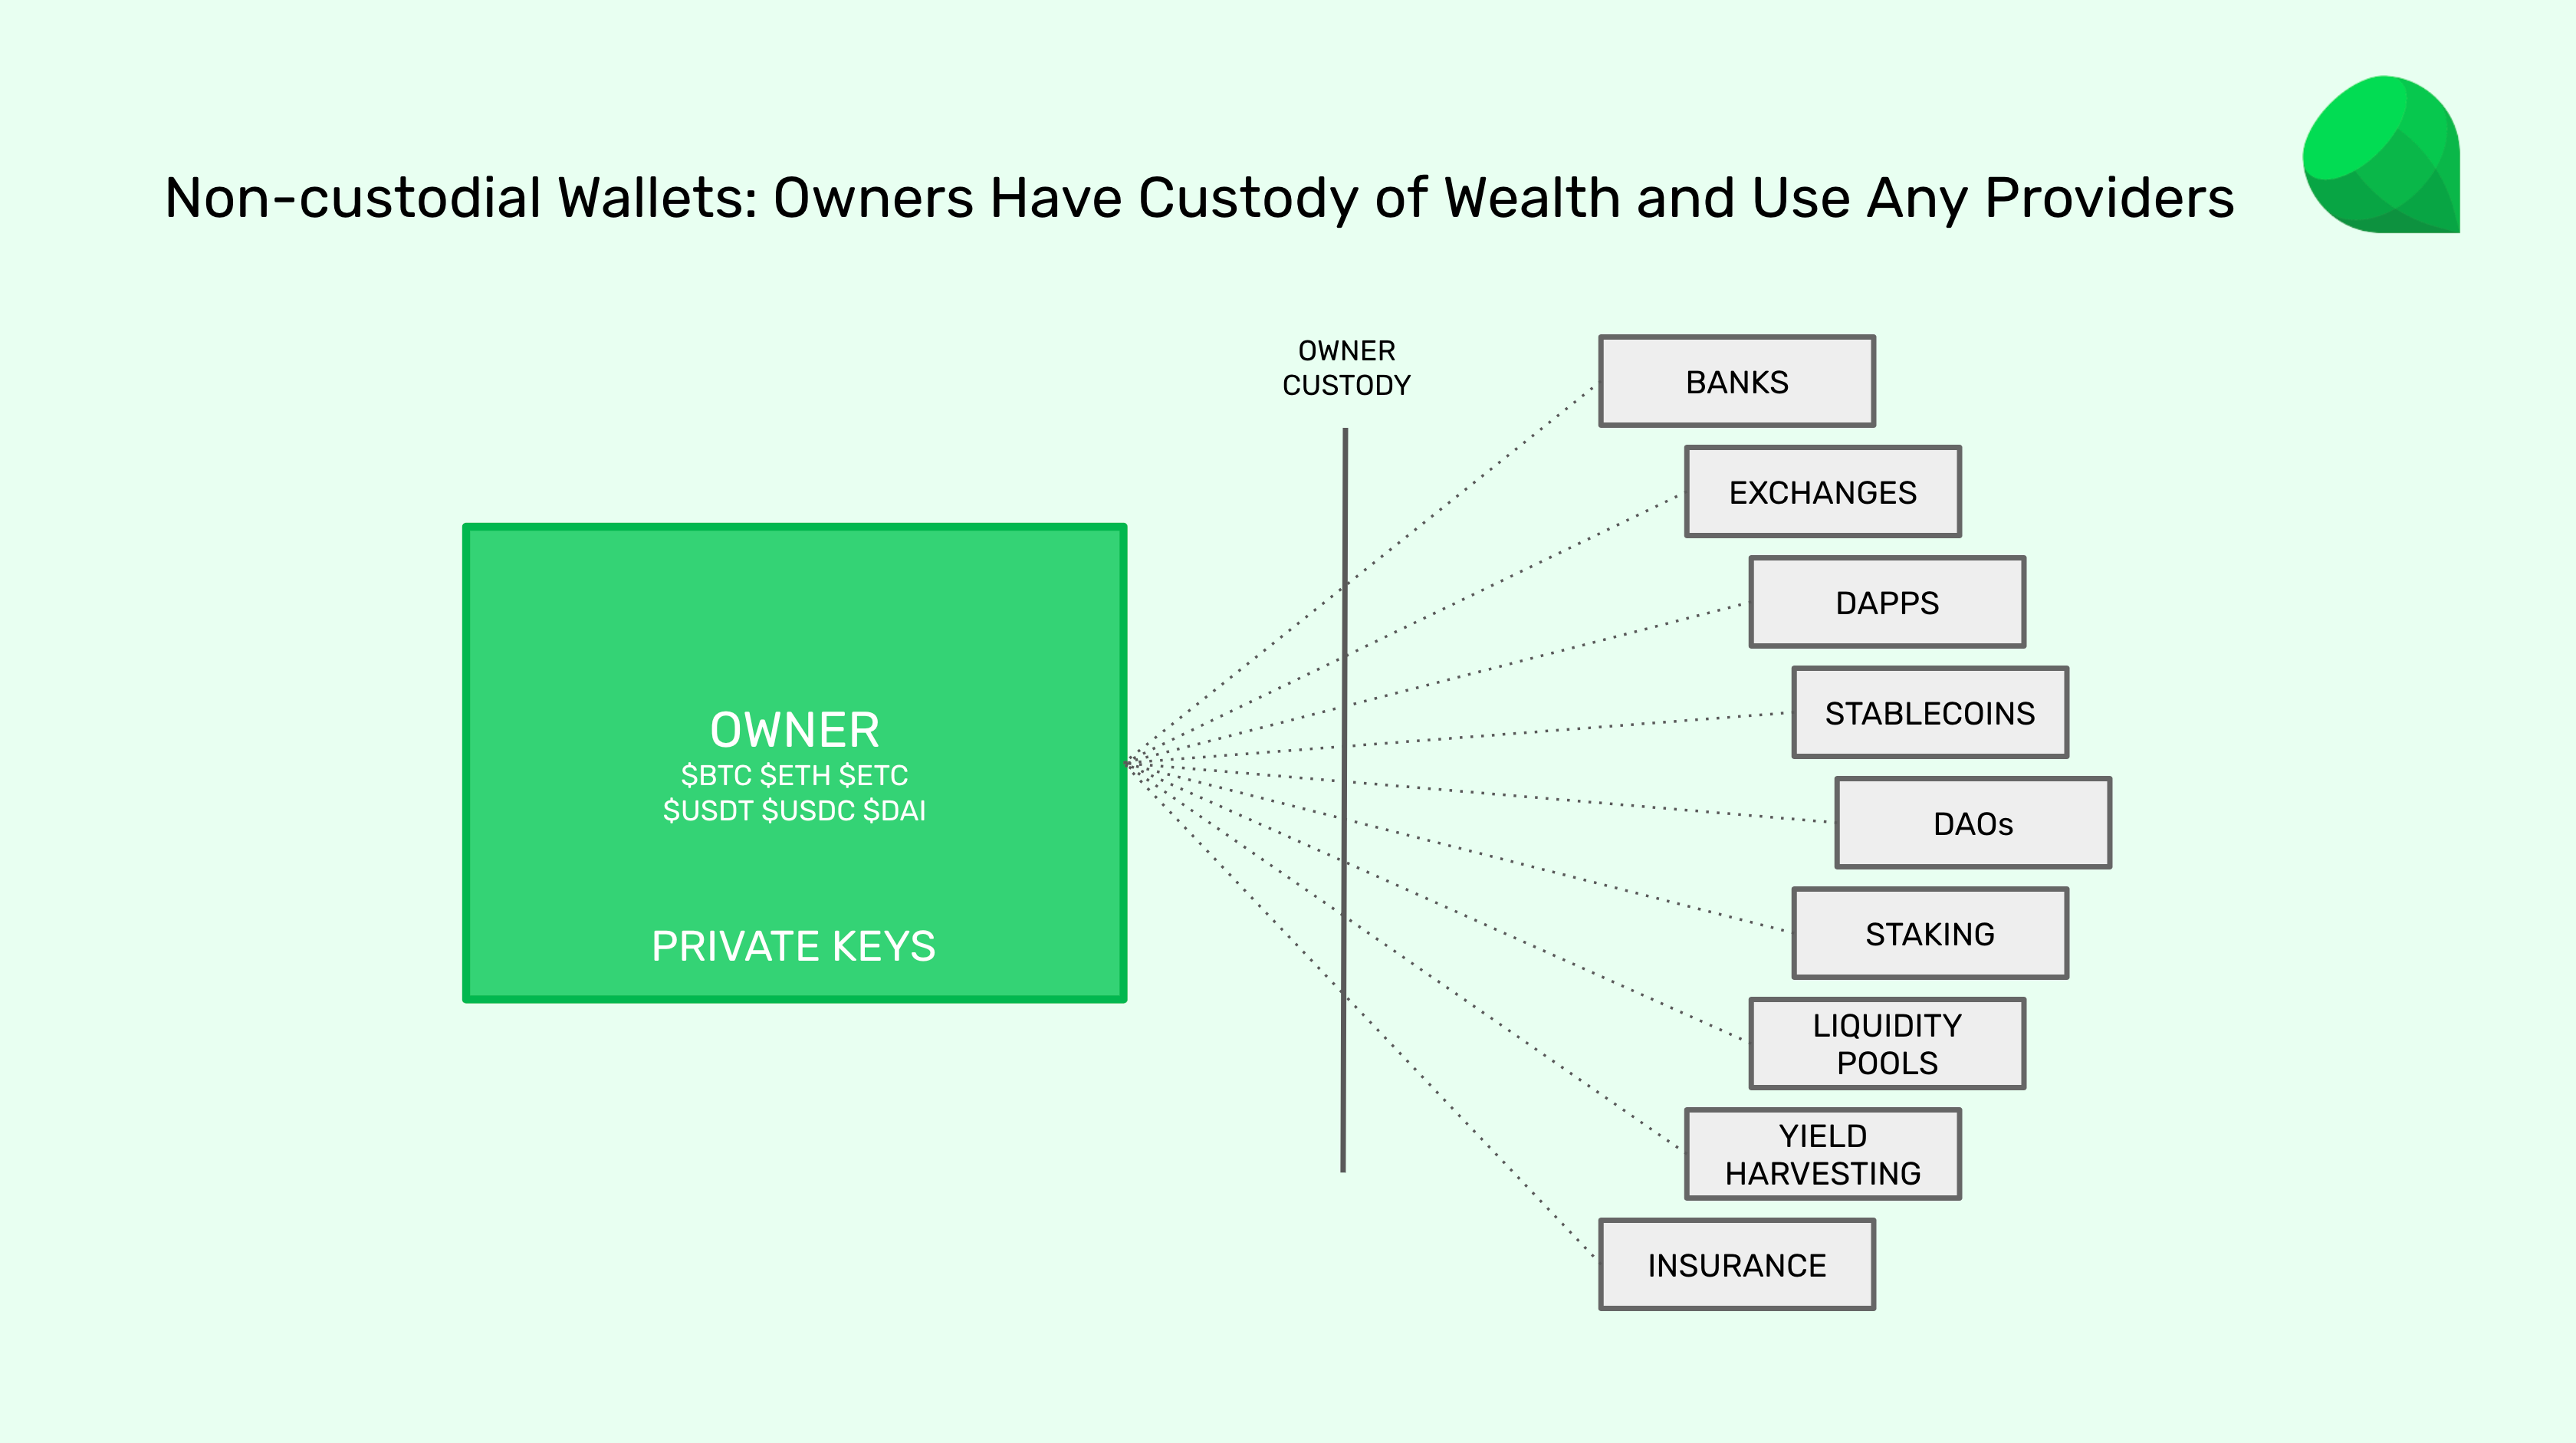 Non-custodial wallets let users keep custody of their wealth.